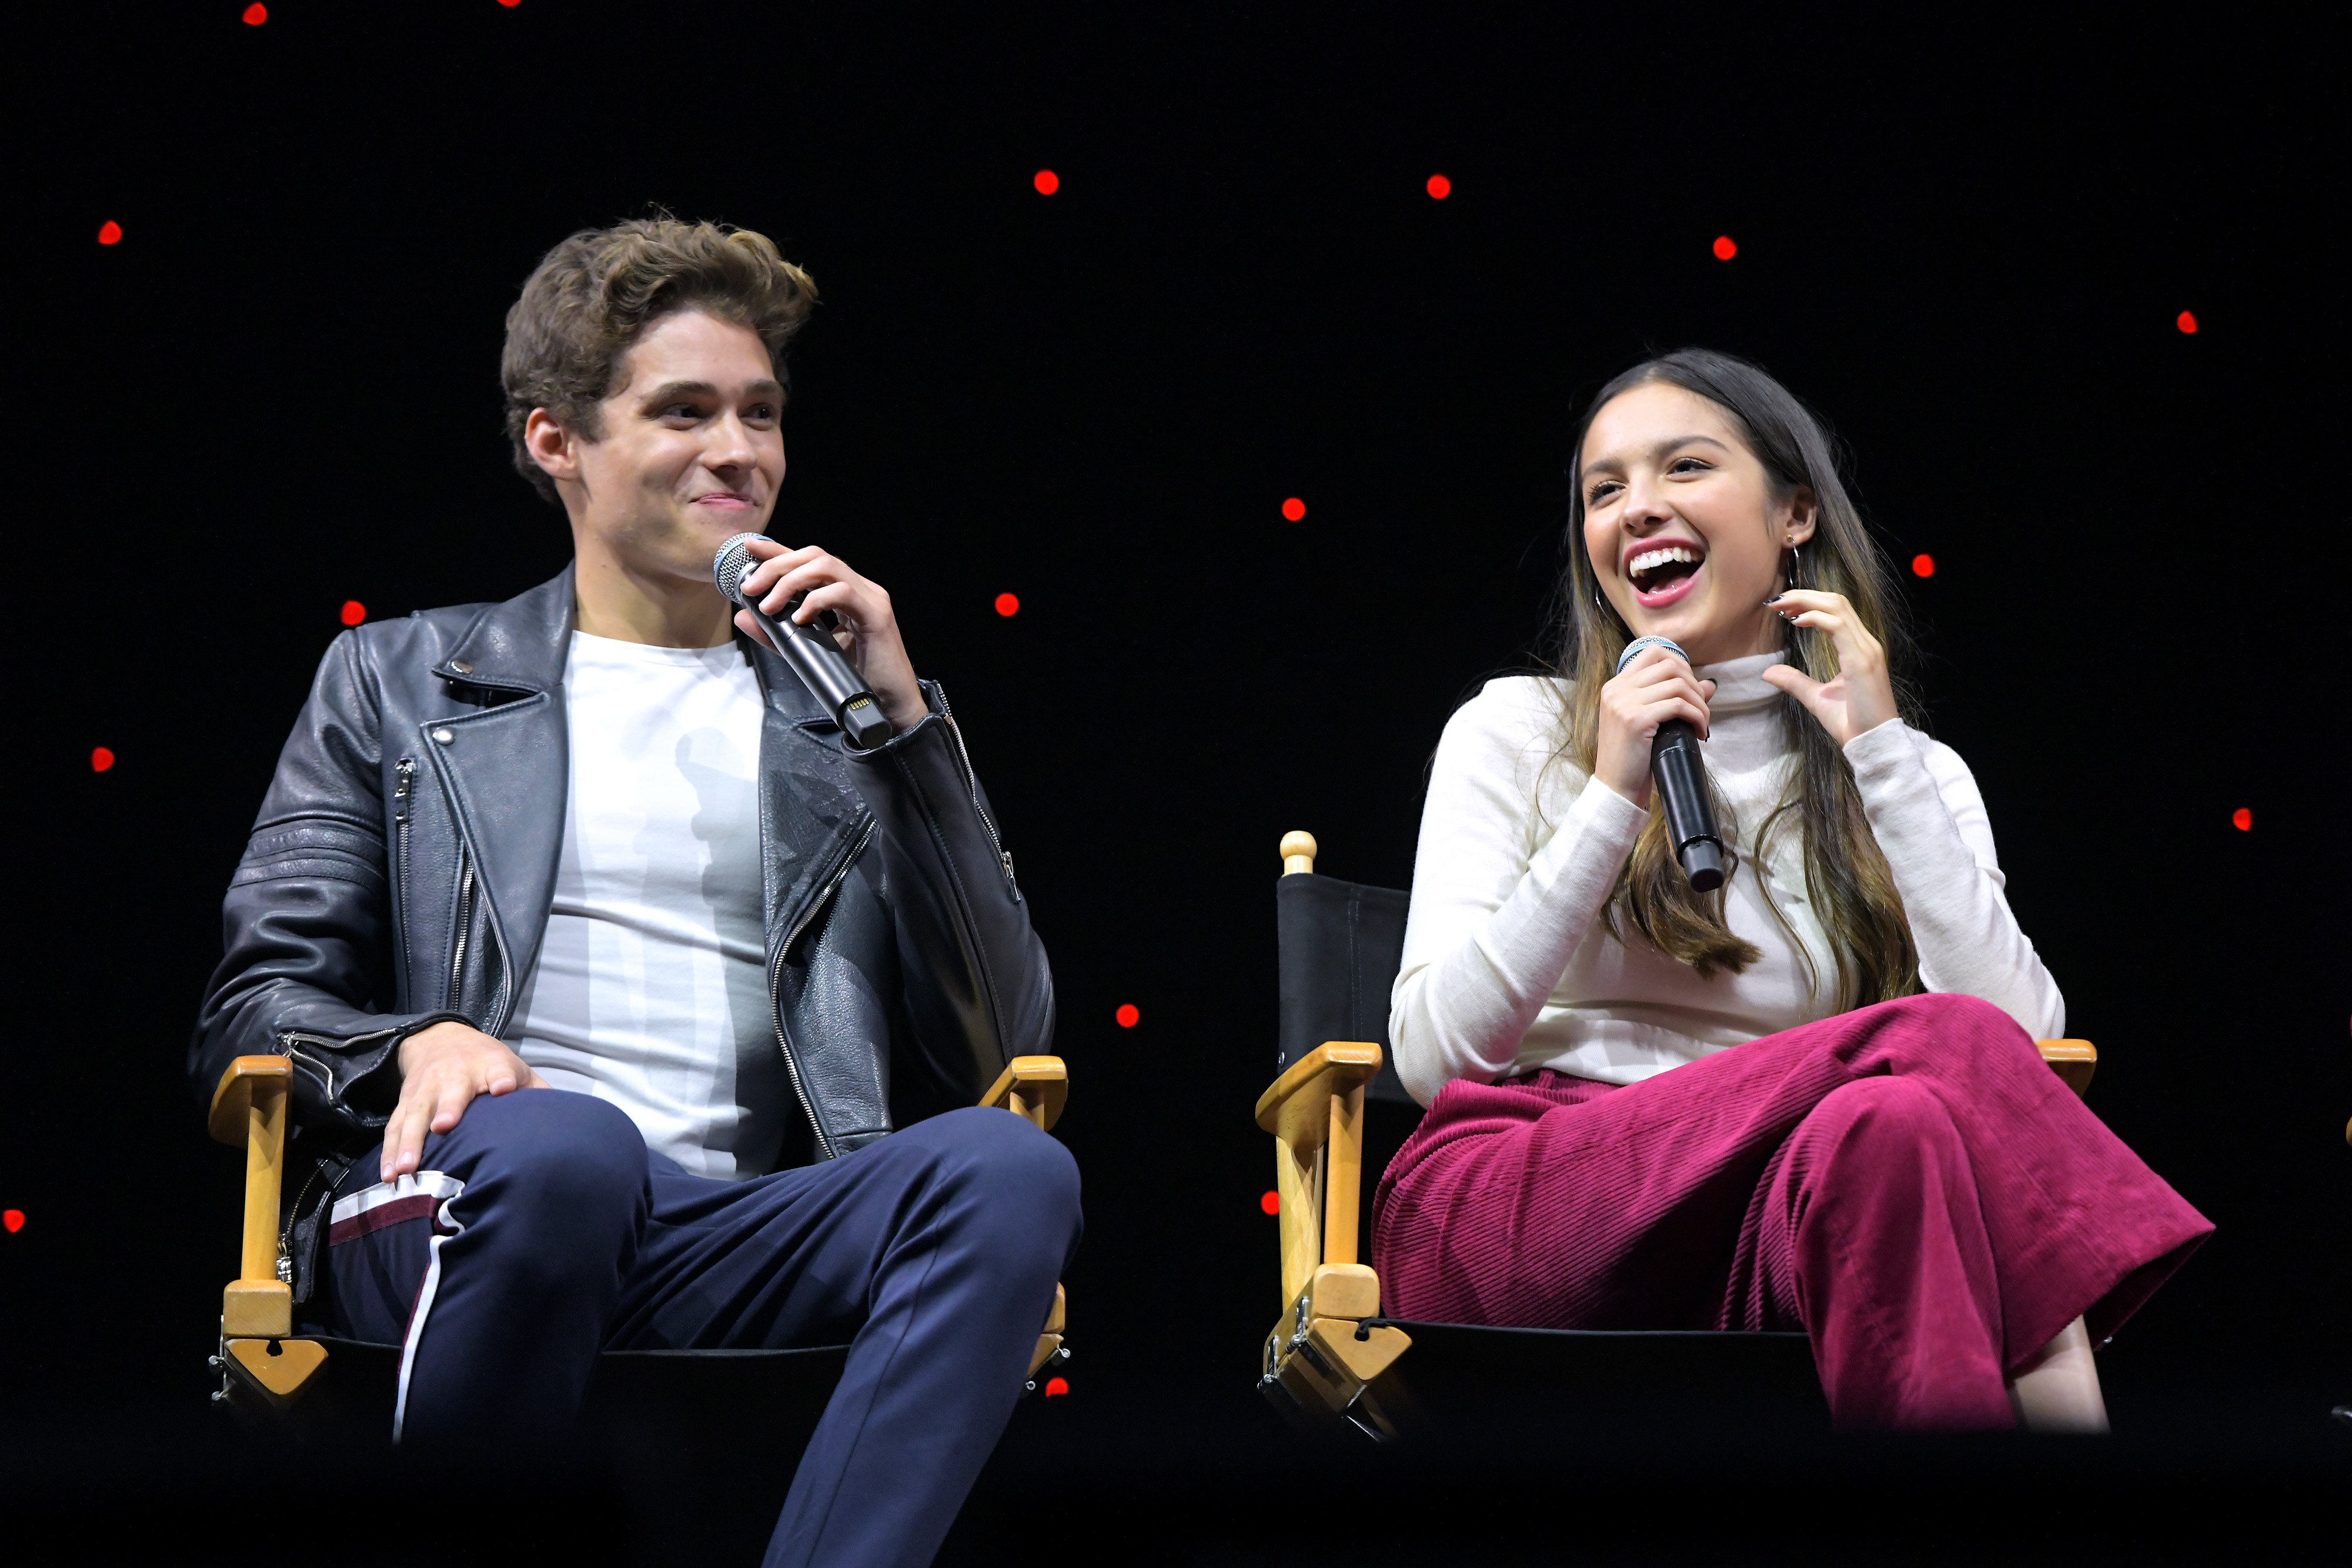 'High School Musical: The Musical: The Series' cast members Joshua Bassett and Olivia Rodrigo sitting together during a panel